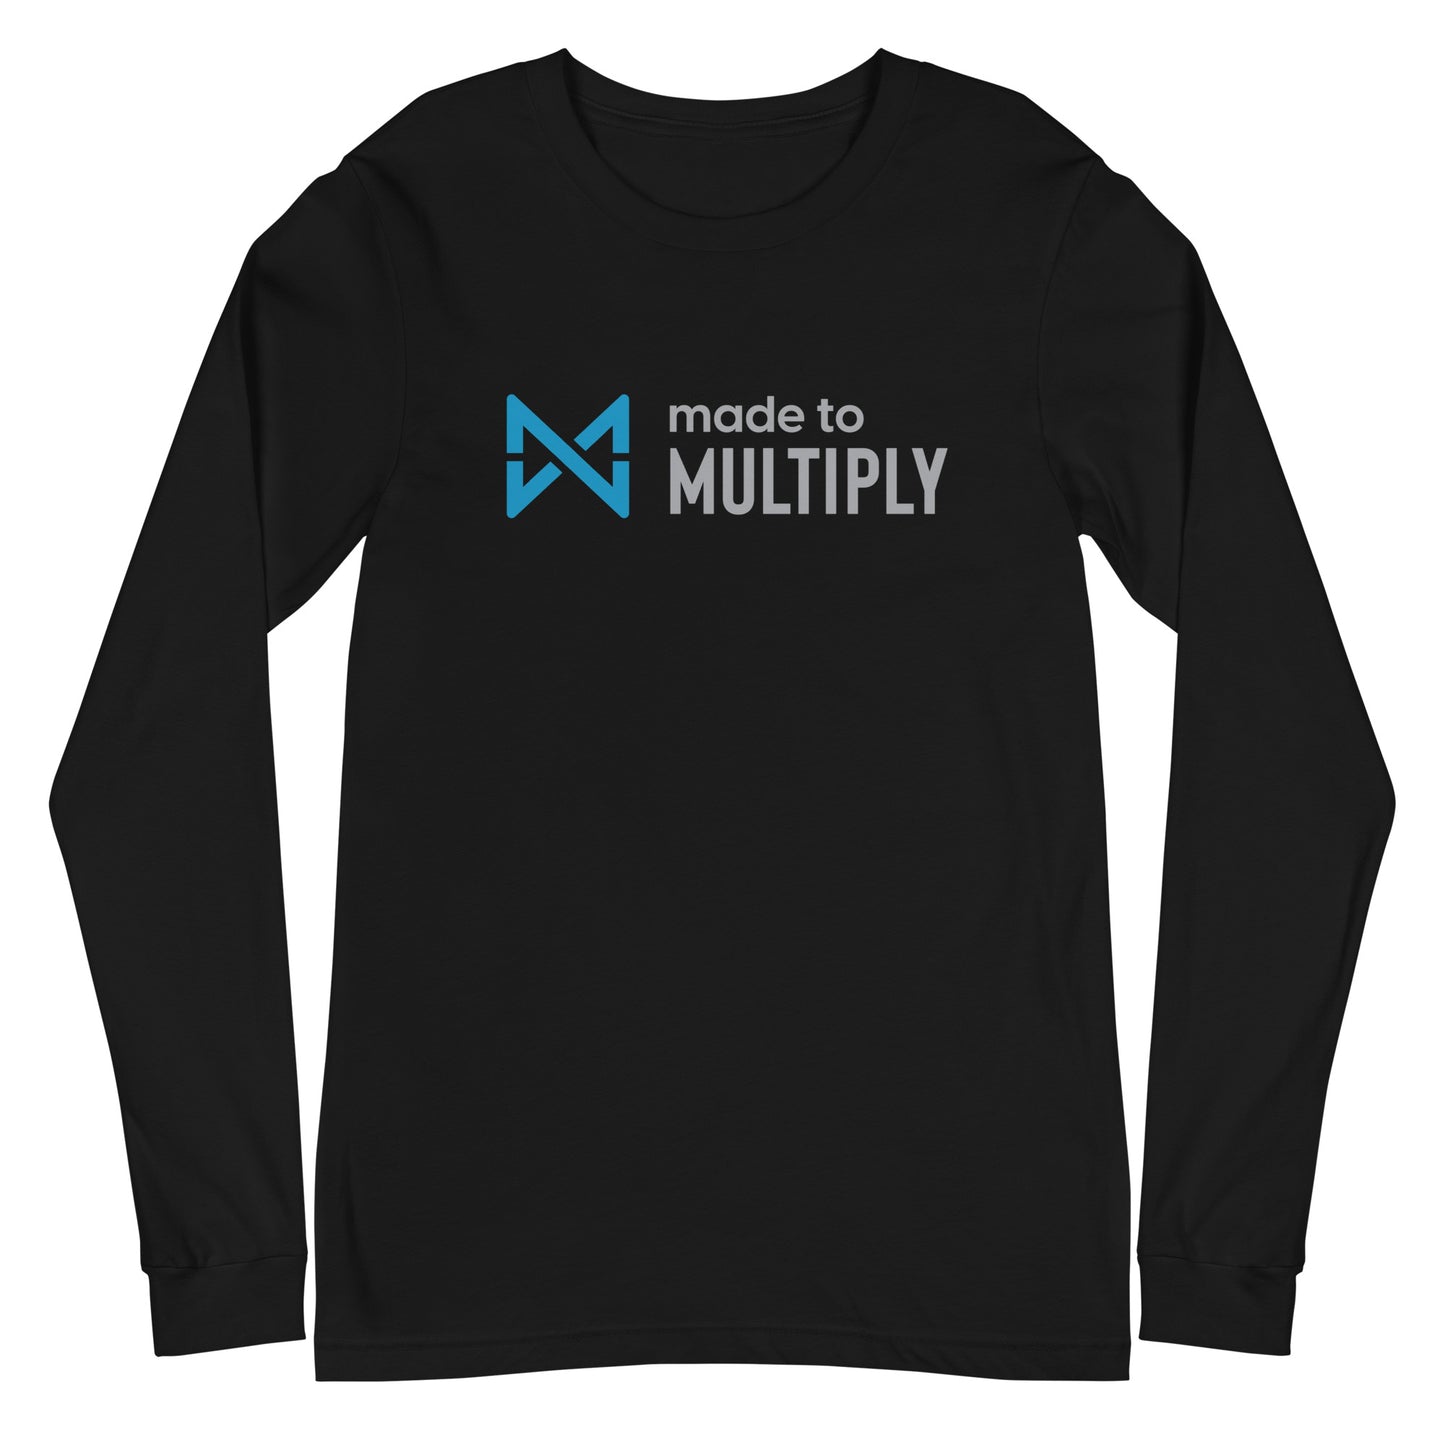 Made to Multiply - Unisex Long Sleeve Tee